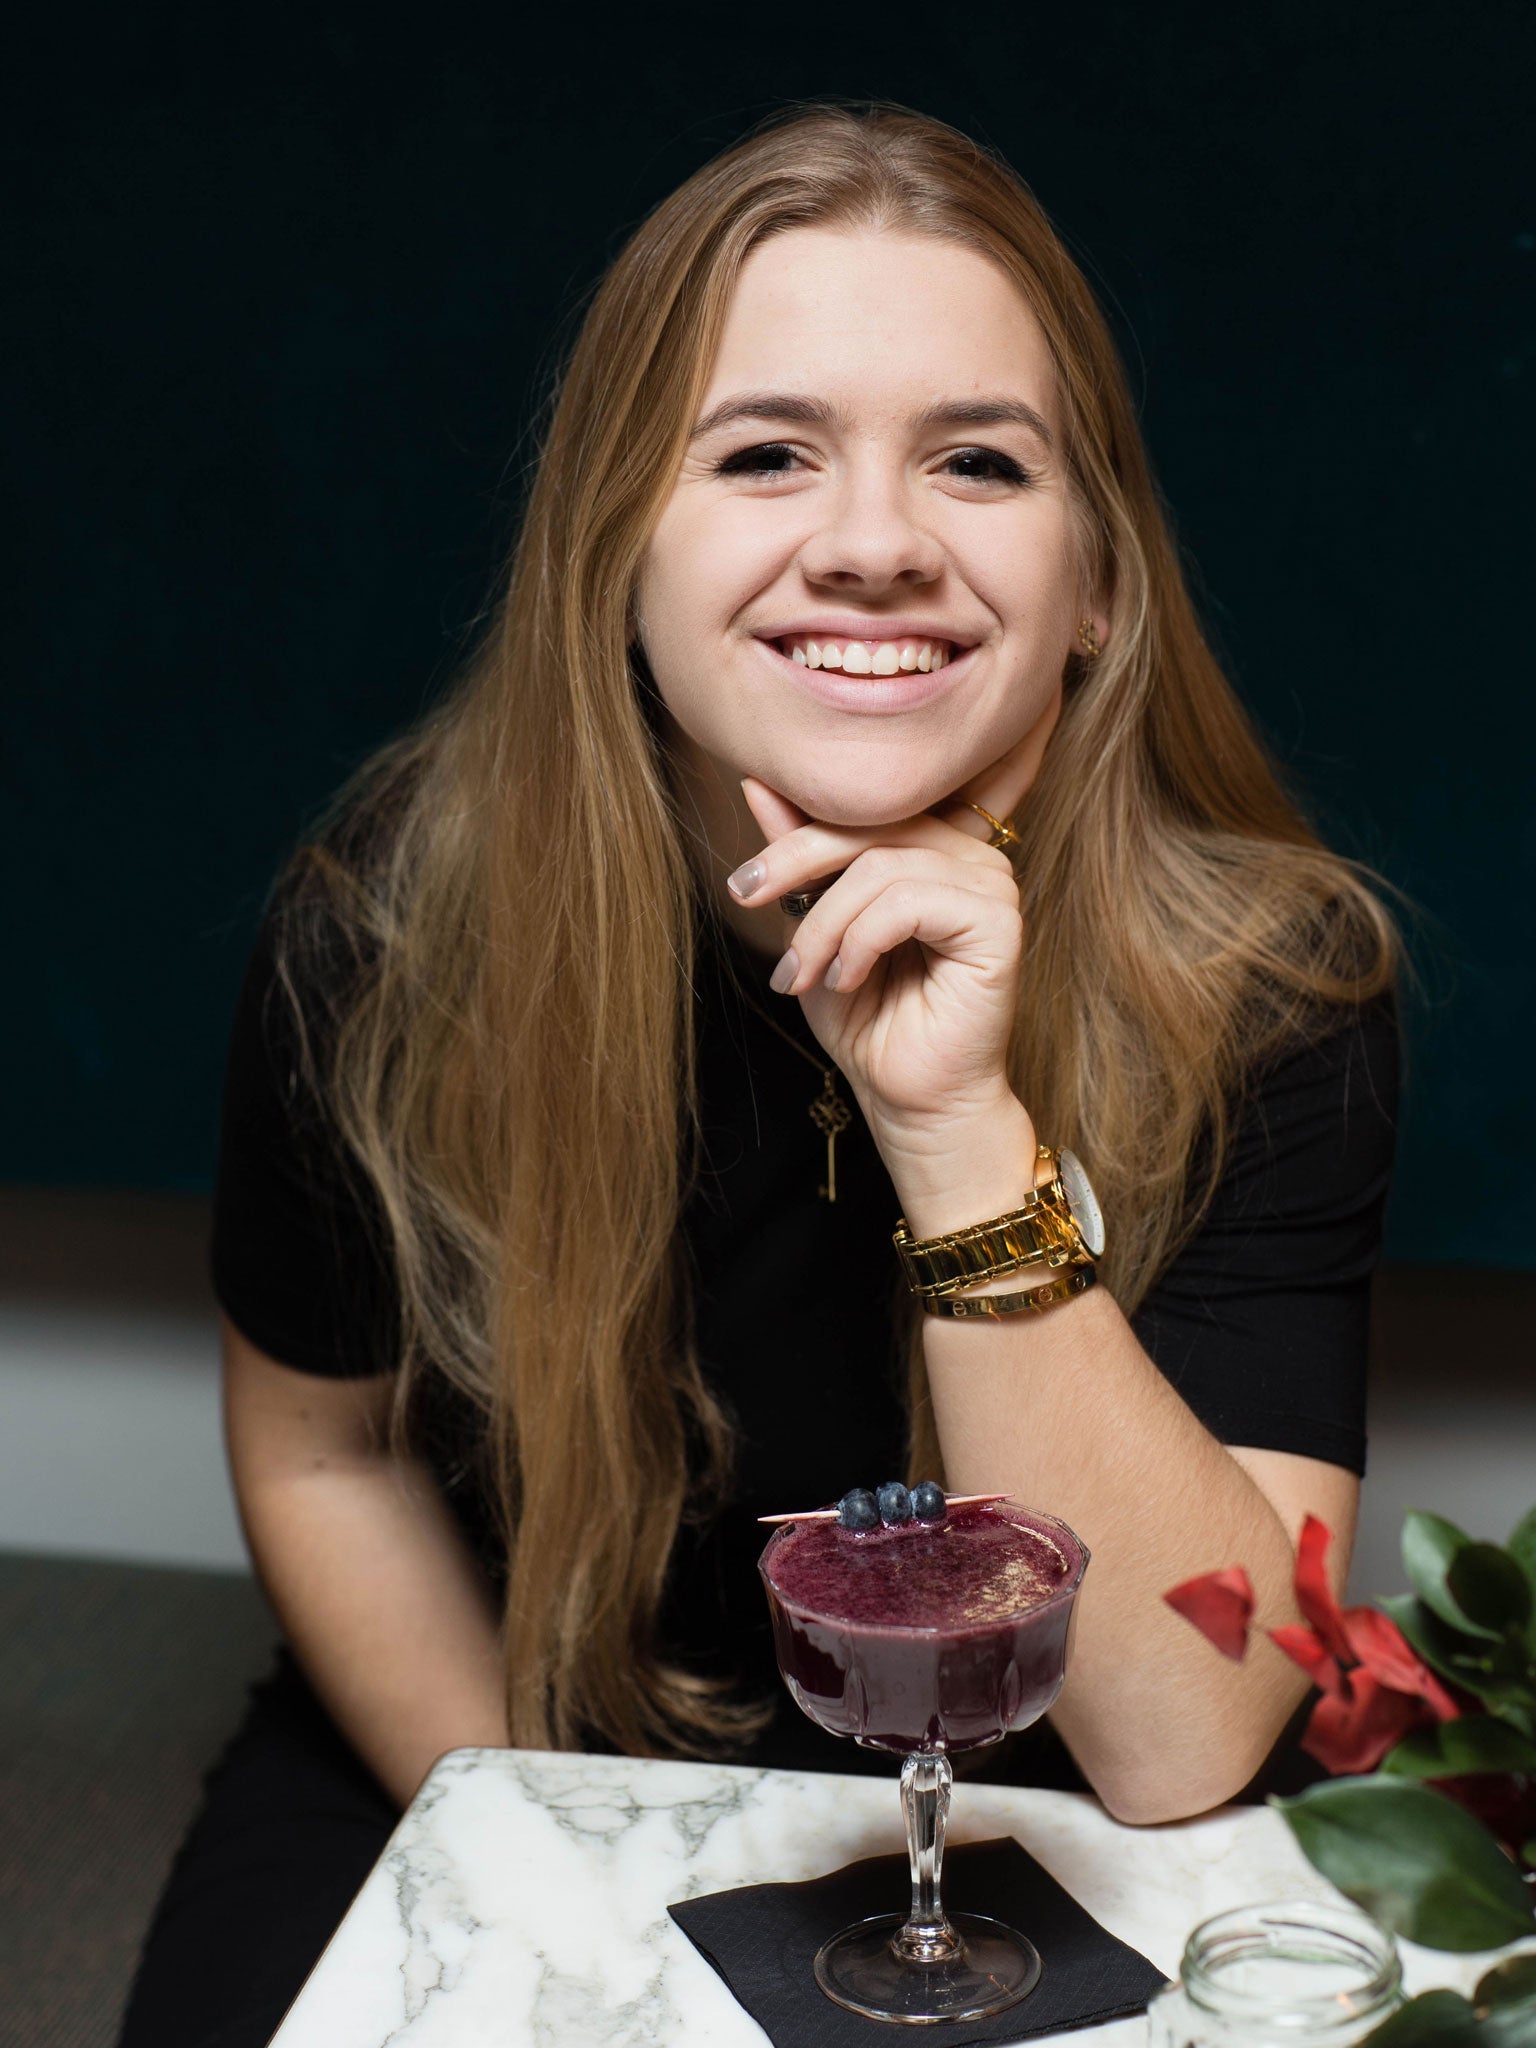 Grace Beverley, 18-year-old advocate of healthy living